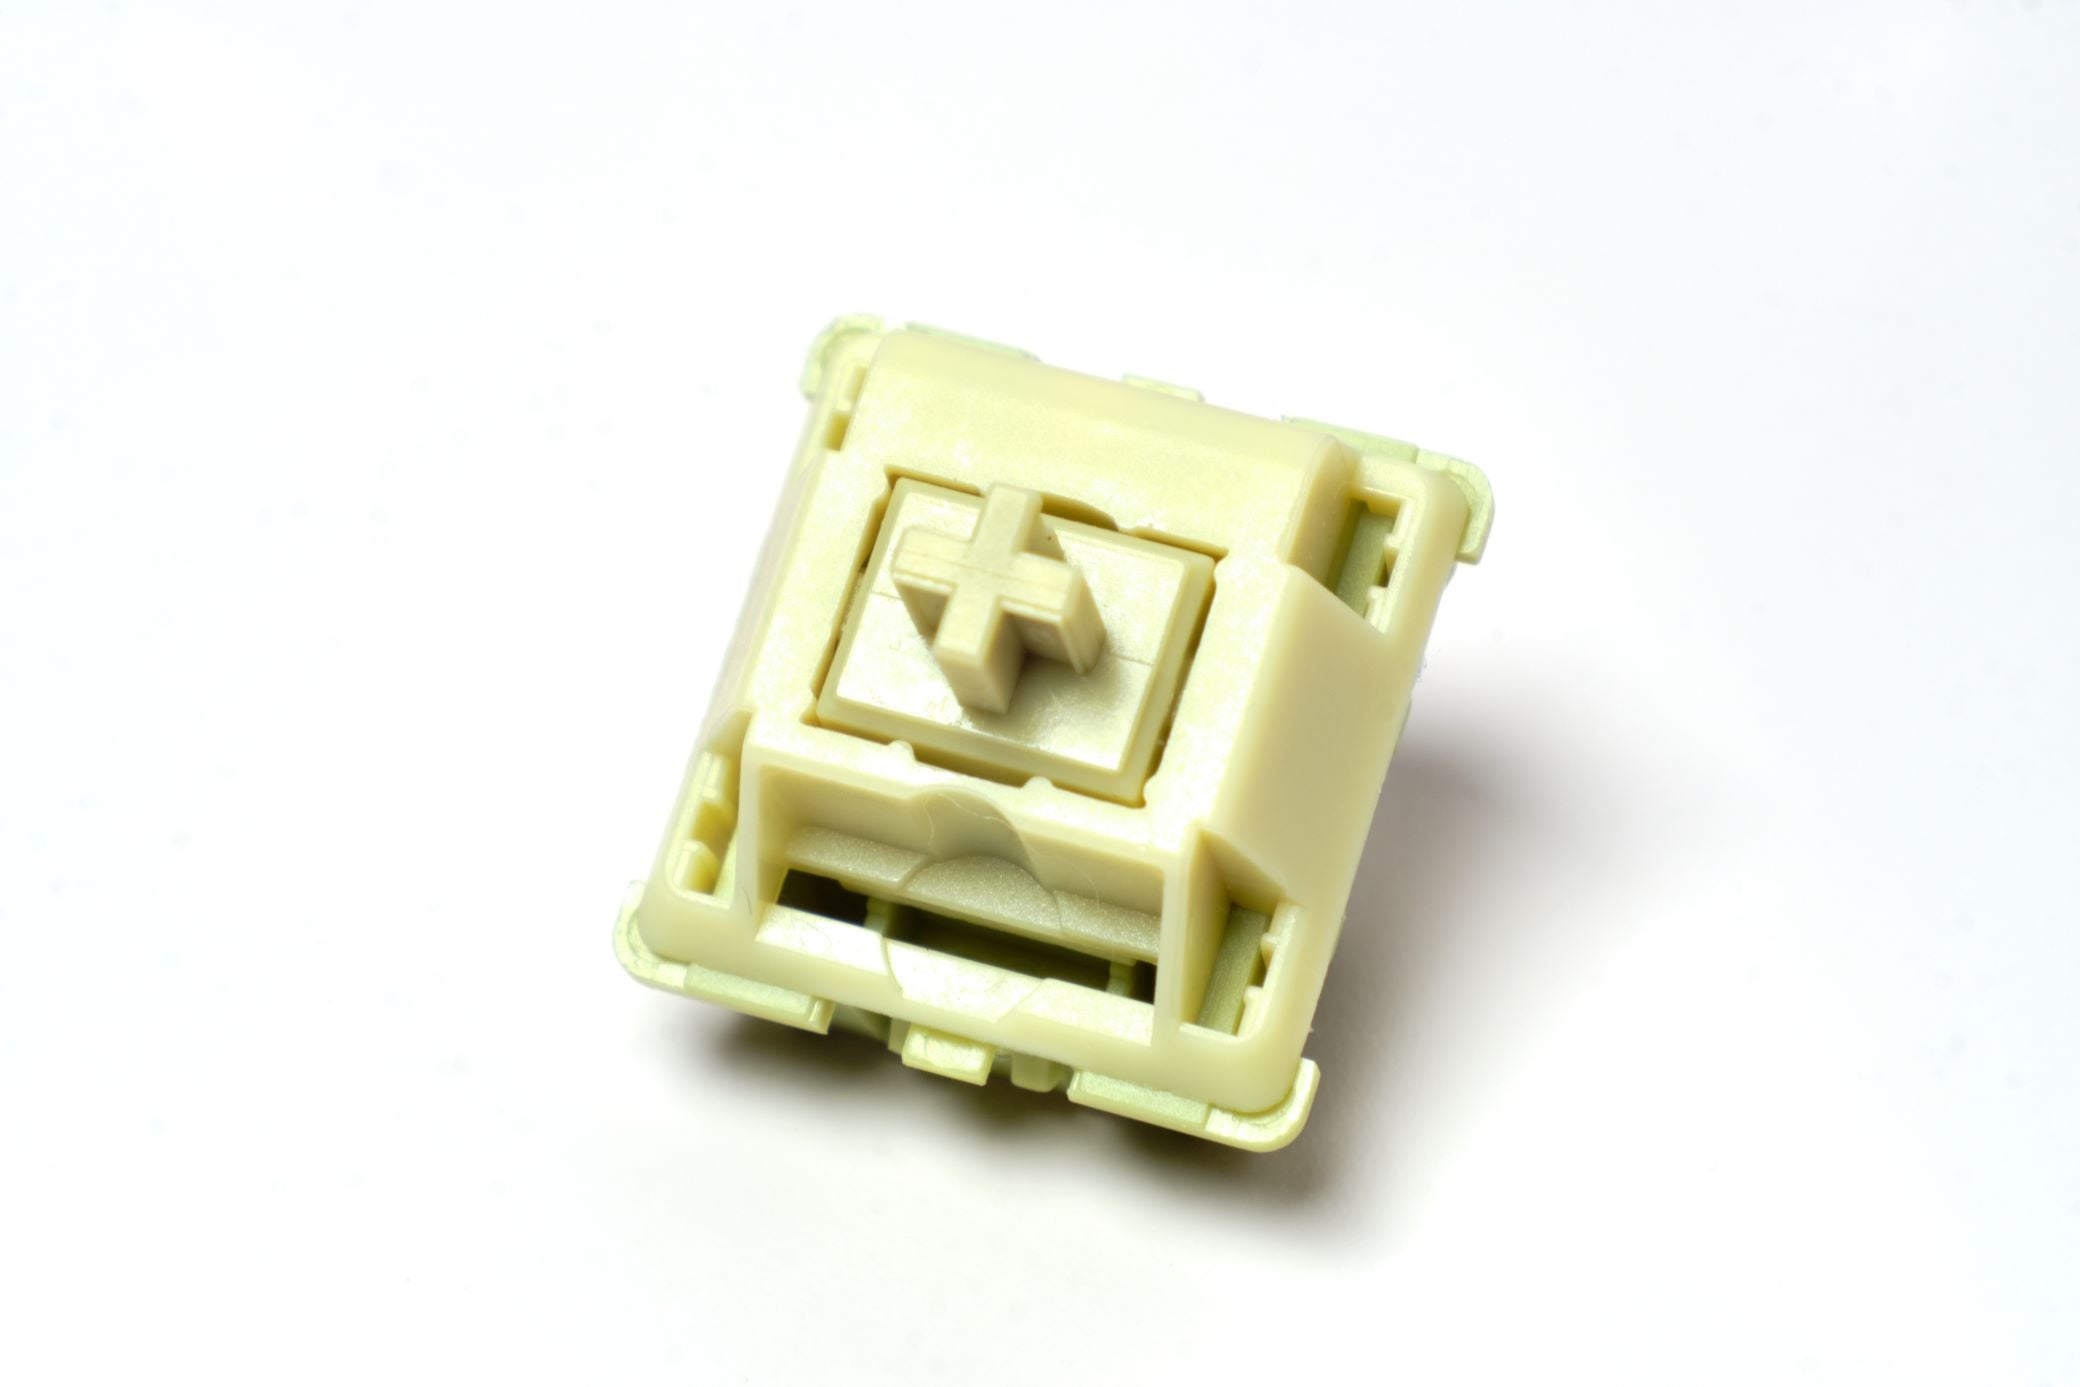 Cloud Tea switches, different from most tactile switches.